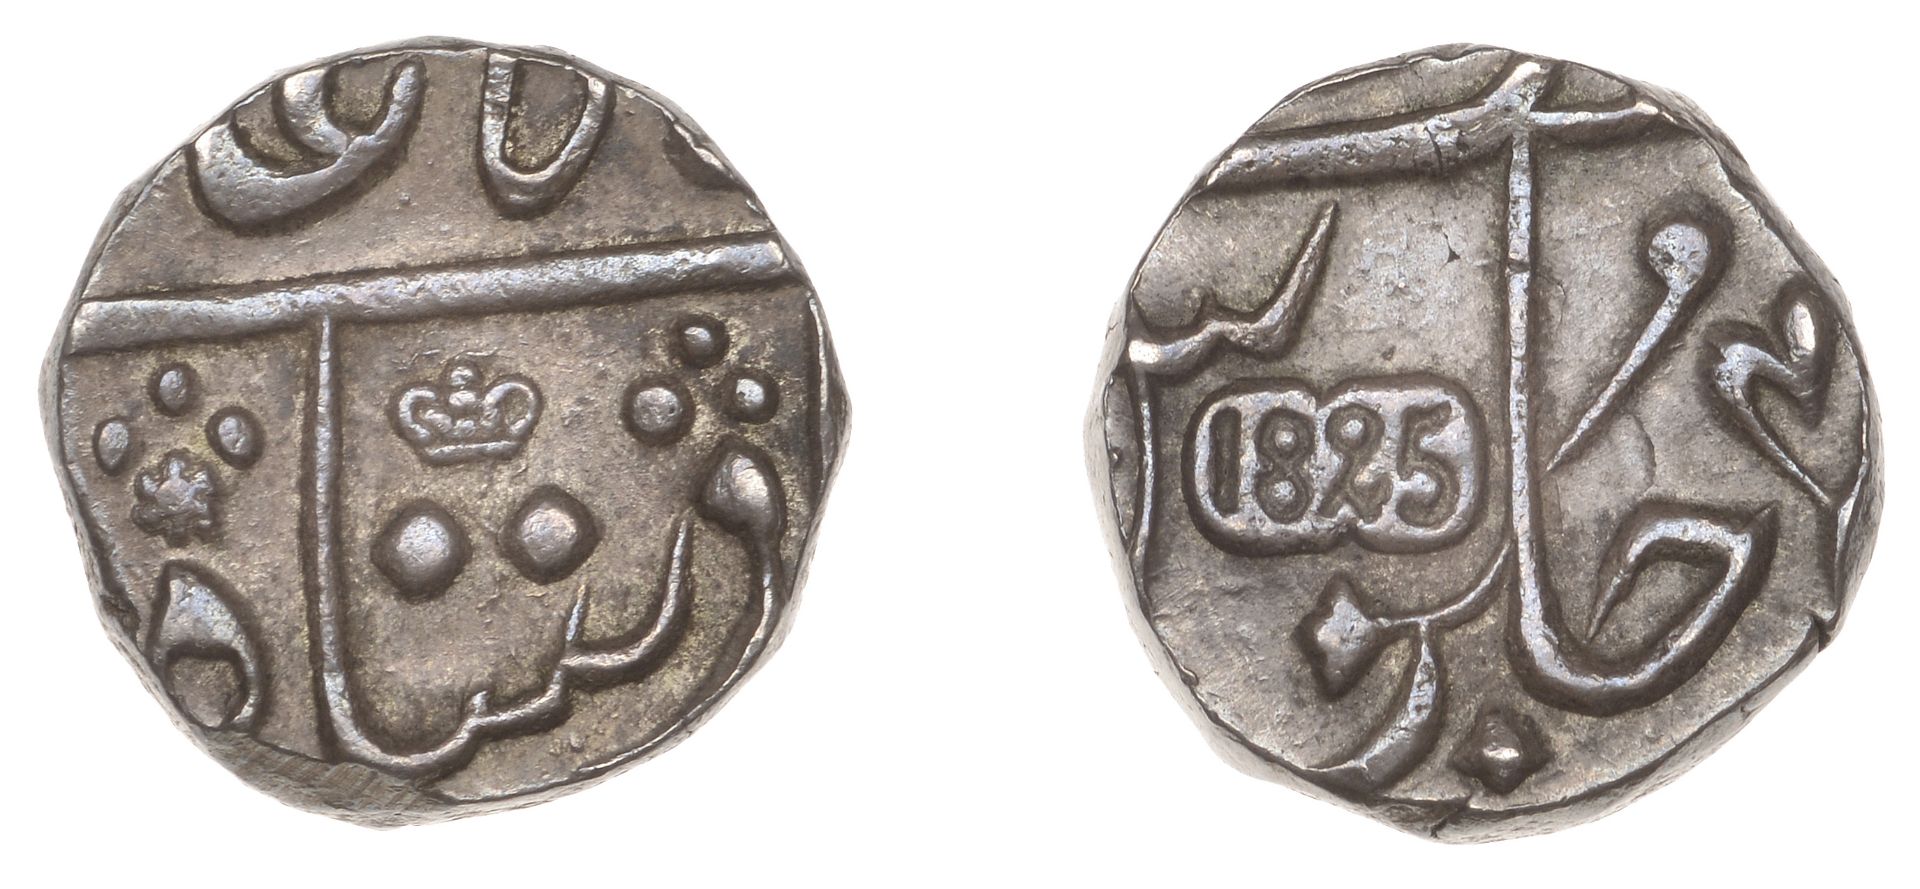 East India Company, Bombay Presidency, Later coinages: Moghul style, silver Half-Rupee, Bomb...